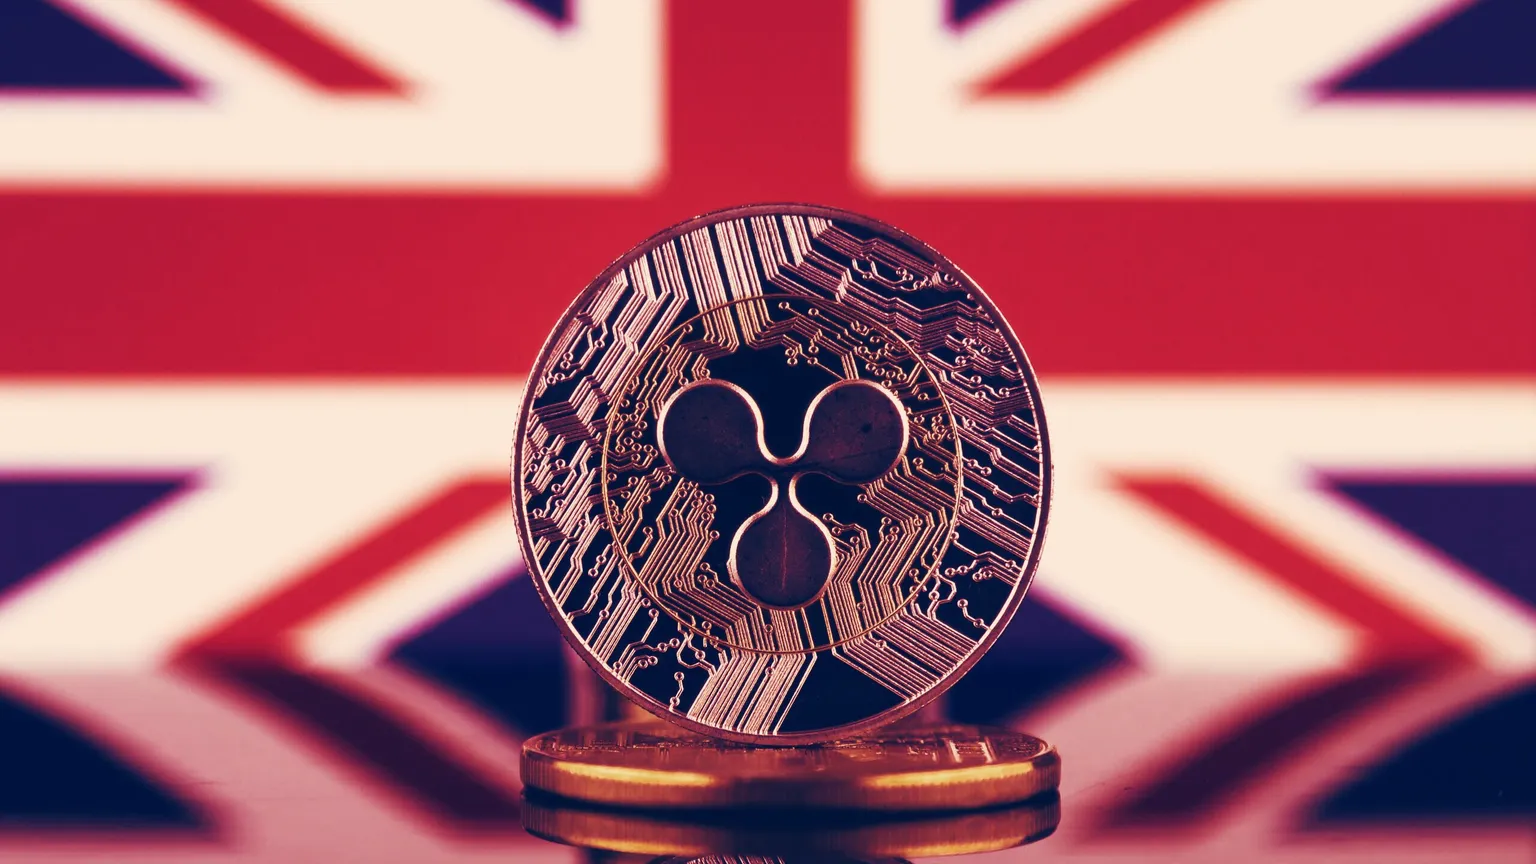 Relocating to the UK holds firm advantages for Ripple. Image: Shutterstock